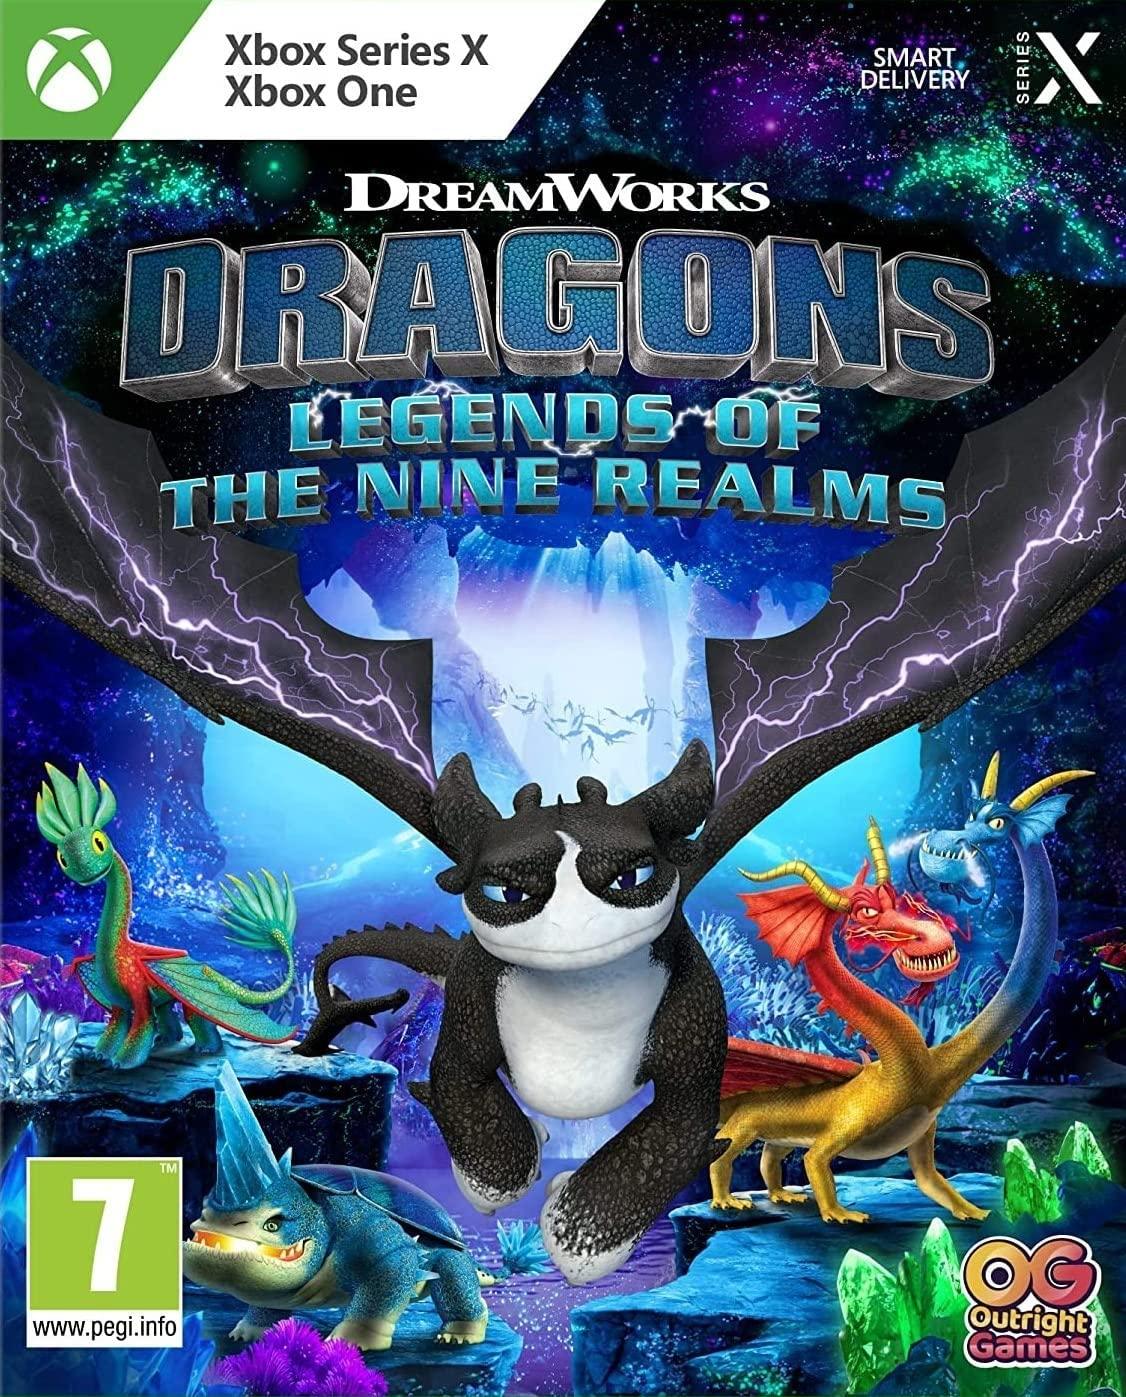 DreamWorks Dragons: Legends of The Nine Realms (Xbox Series X) (Xbox One) - GameStore.mt | Powered by Flutisat